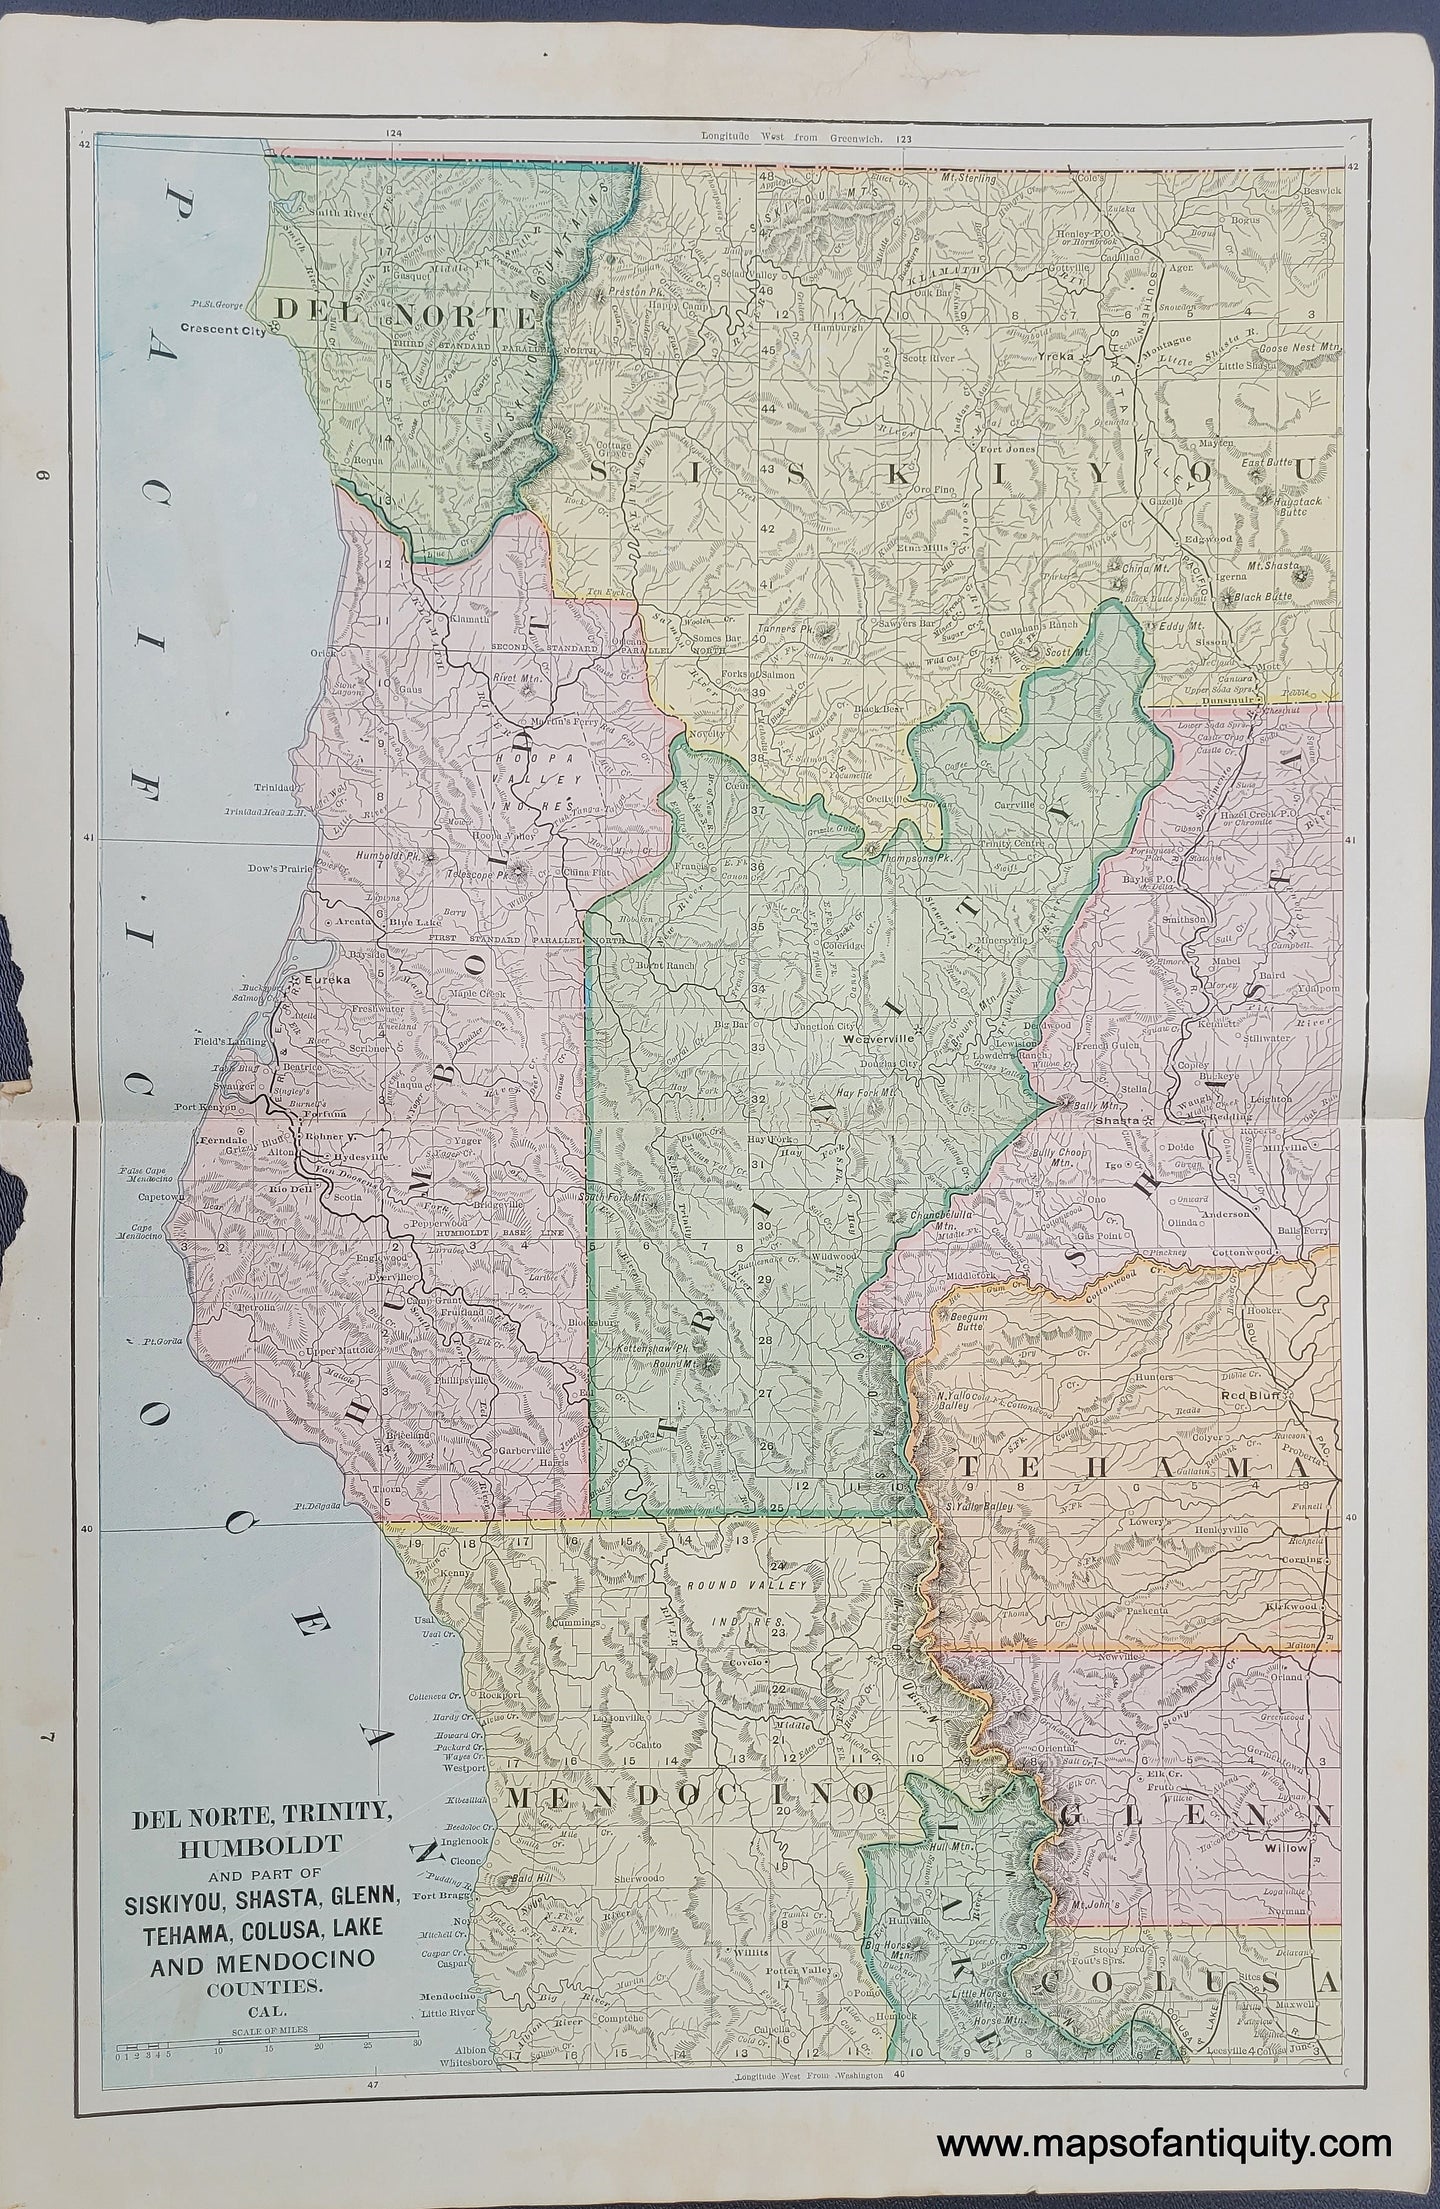 Antique-Map-California-Del-Norte-Trinity-Humboldt-and-Part-of-Siskiyou-Shasta-Glenn-Tehama-Colusa-Lake-Mendocino-Counties-Cal.-County-Home-Library-and-Supply-Association-Pacific-Coast-1892-1890s-1800s-Late-19th-Century-Maps-of-Antiquity-